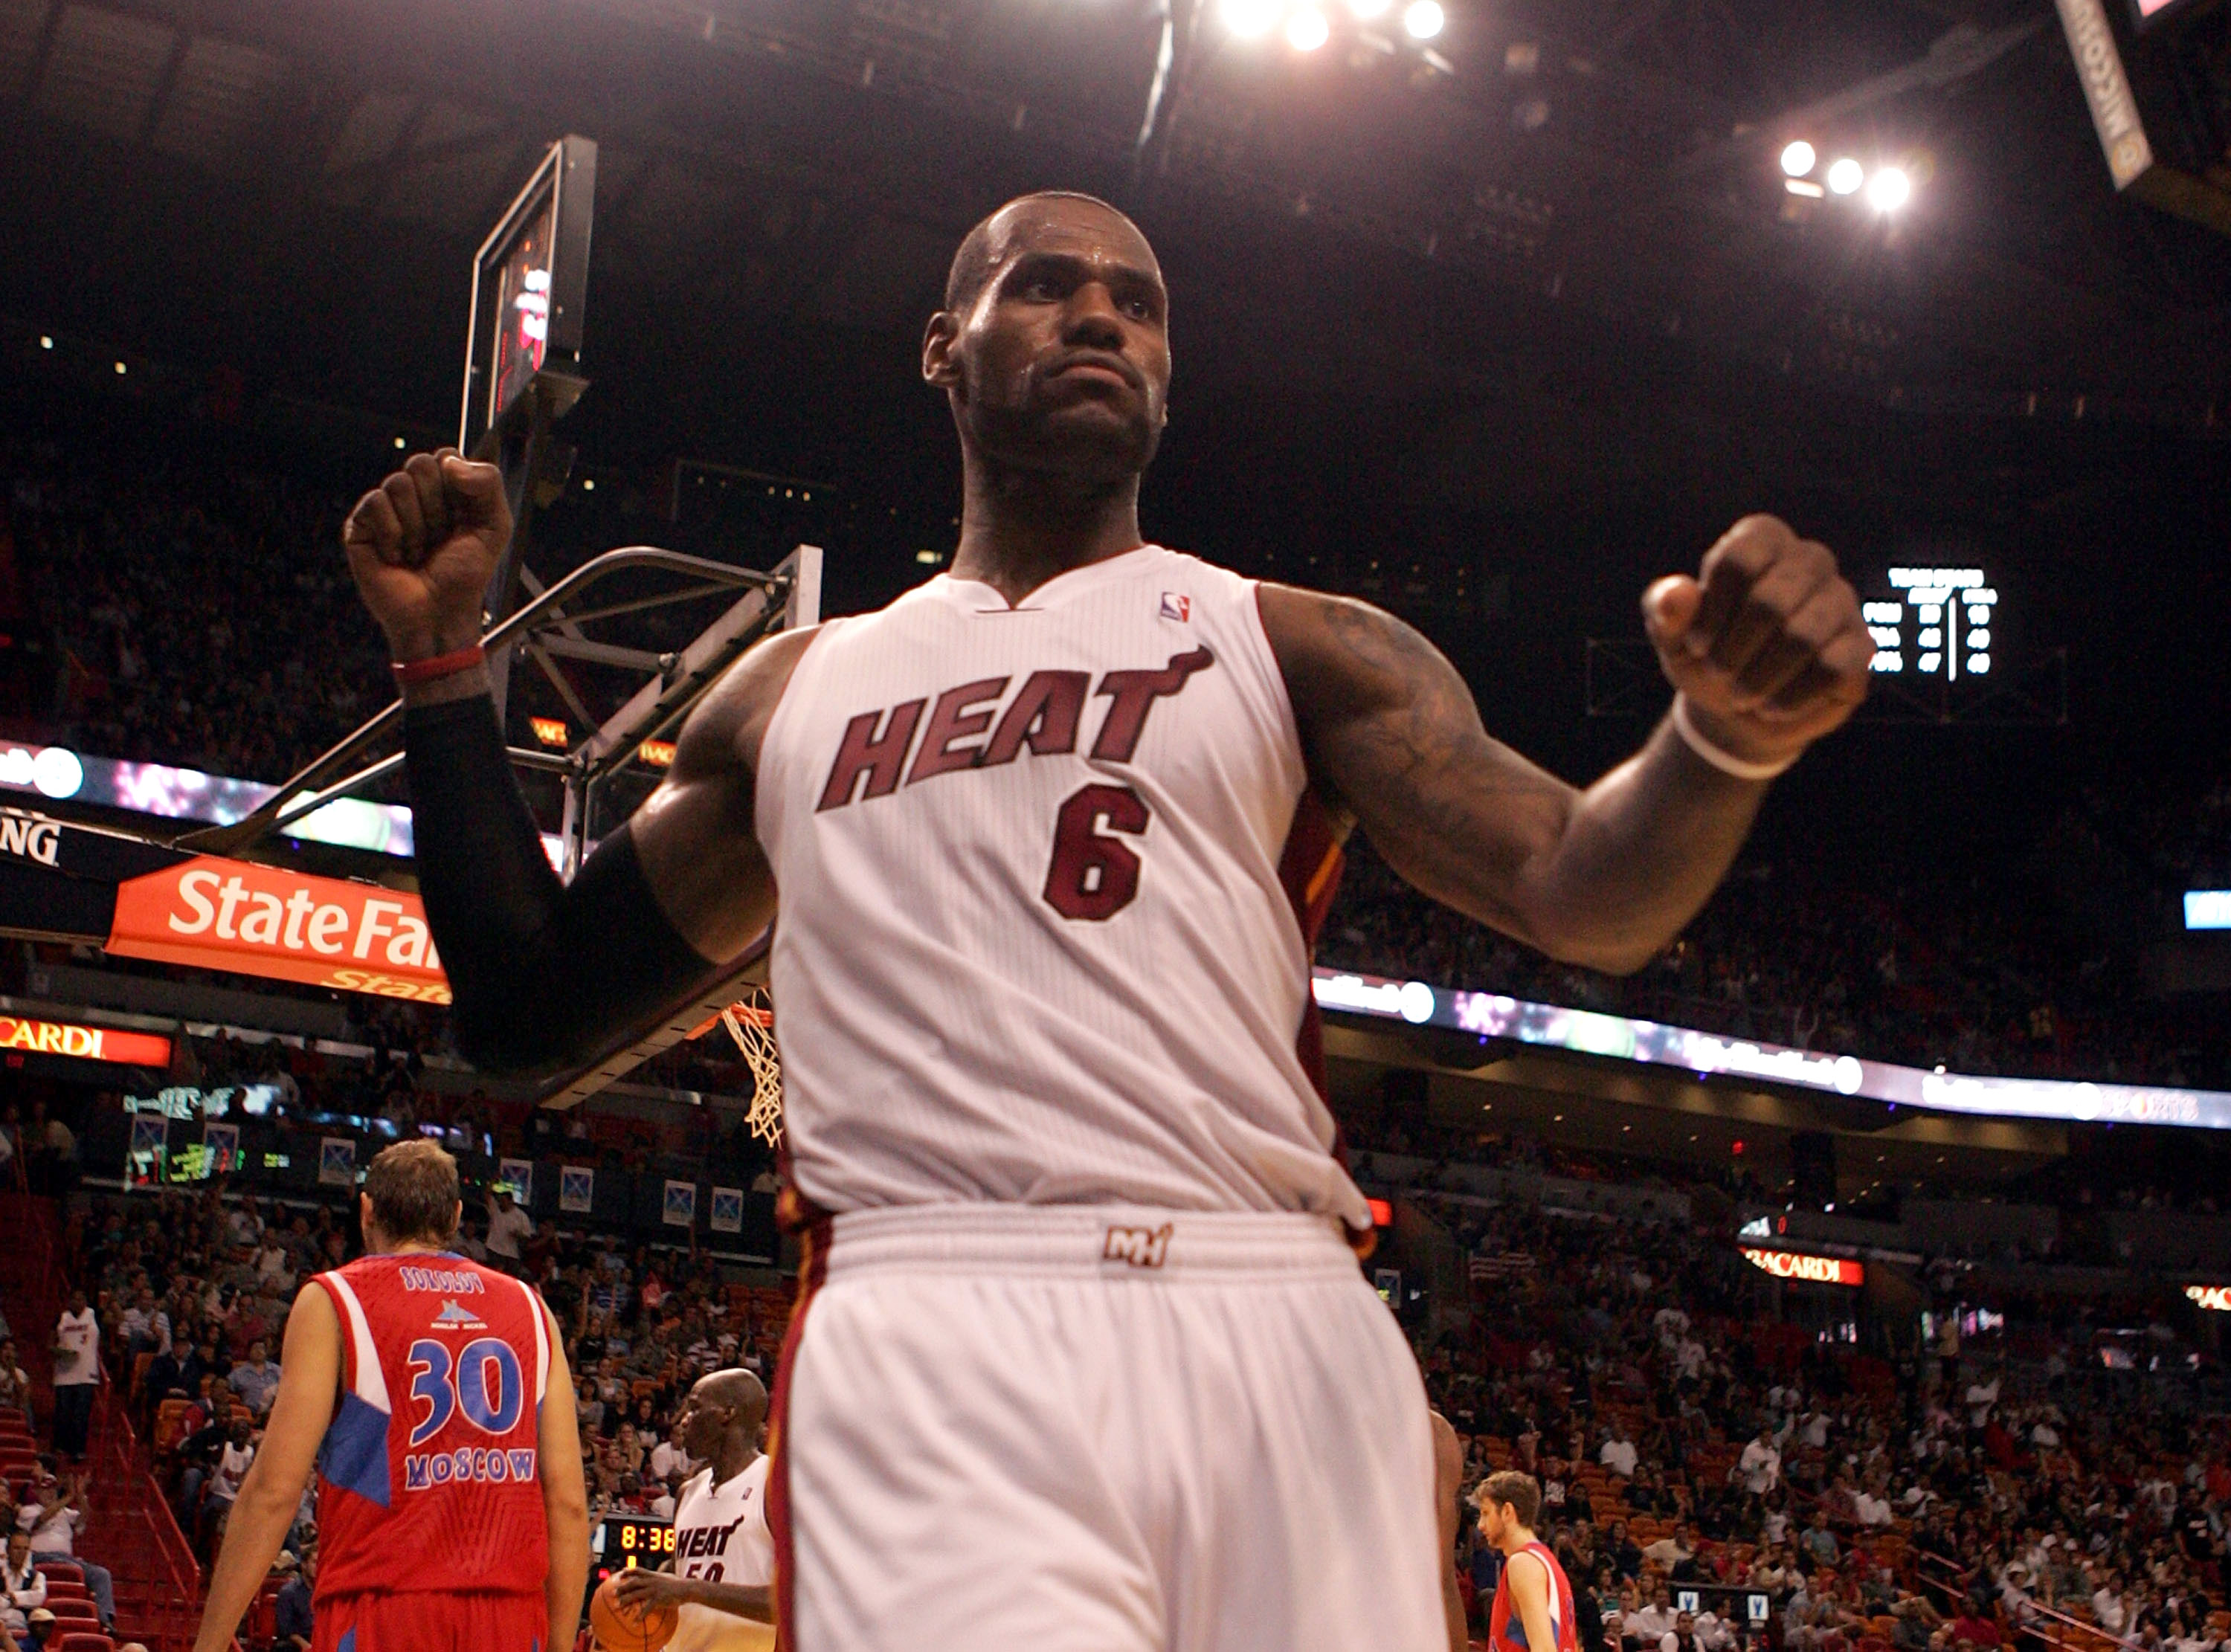 MIAMI - OCTOBER 12:  Forward LeBron James #6 of the Miami Heat celebrates against CSKA Moskow on October 12, 2010 in Miami, Florida.  NOTE TO USER: User expressly acknowledges and agrees that, by downloading and or using this photograph, User is consentin